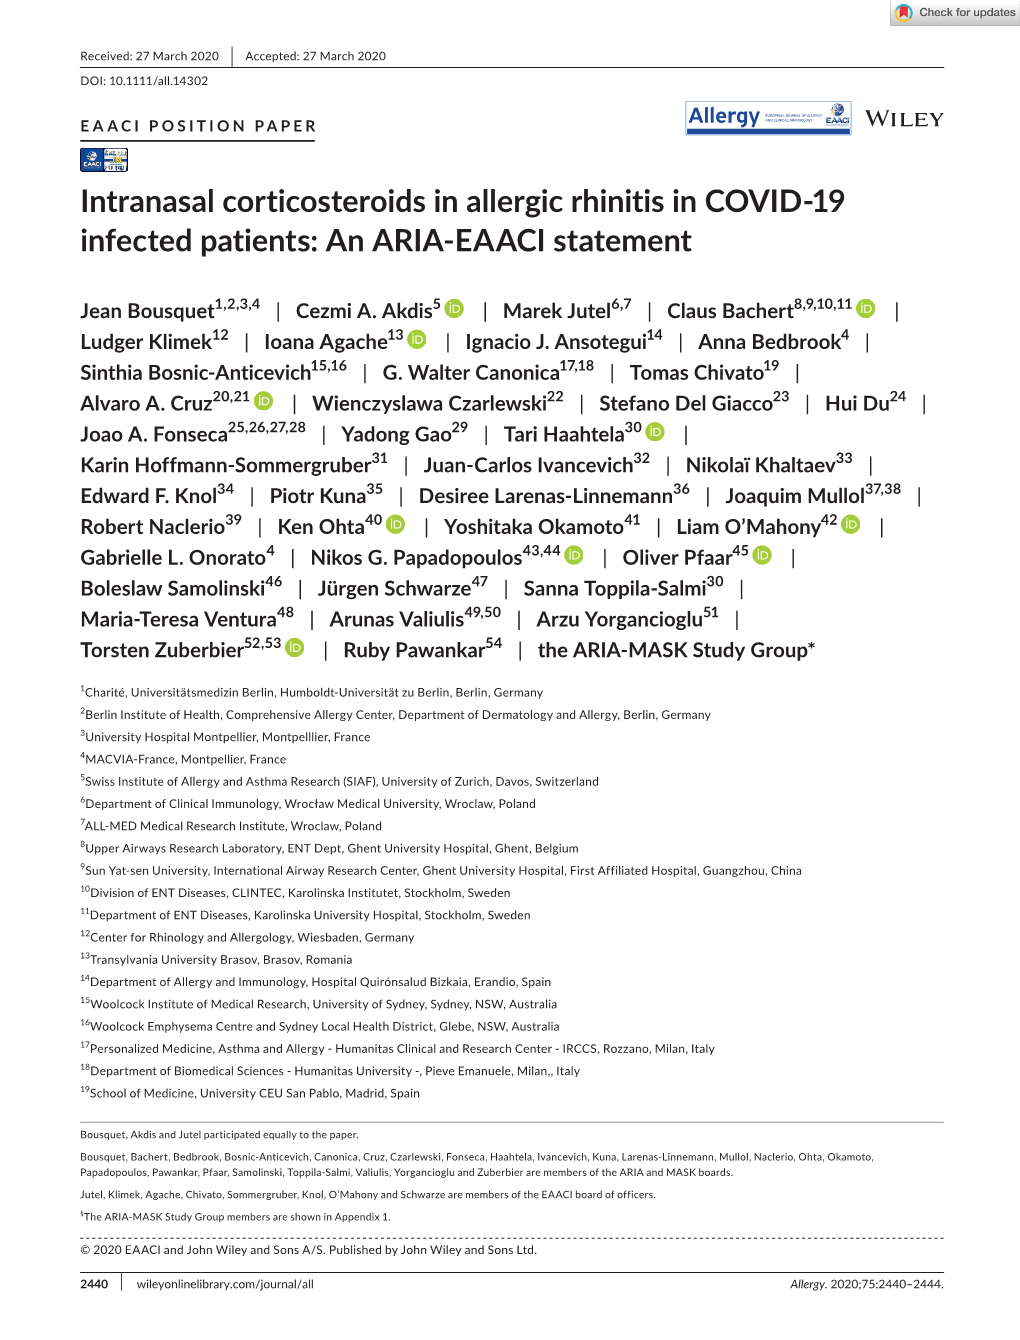 Intranasal Corticosteroids in Allergic Rhinitis in COVID‐19 Infected Patients